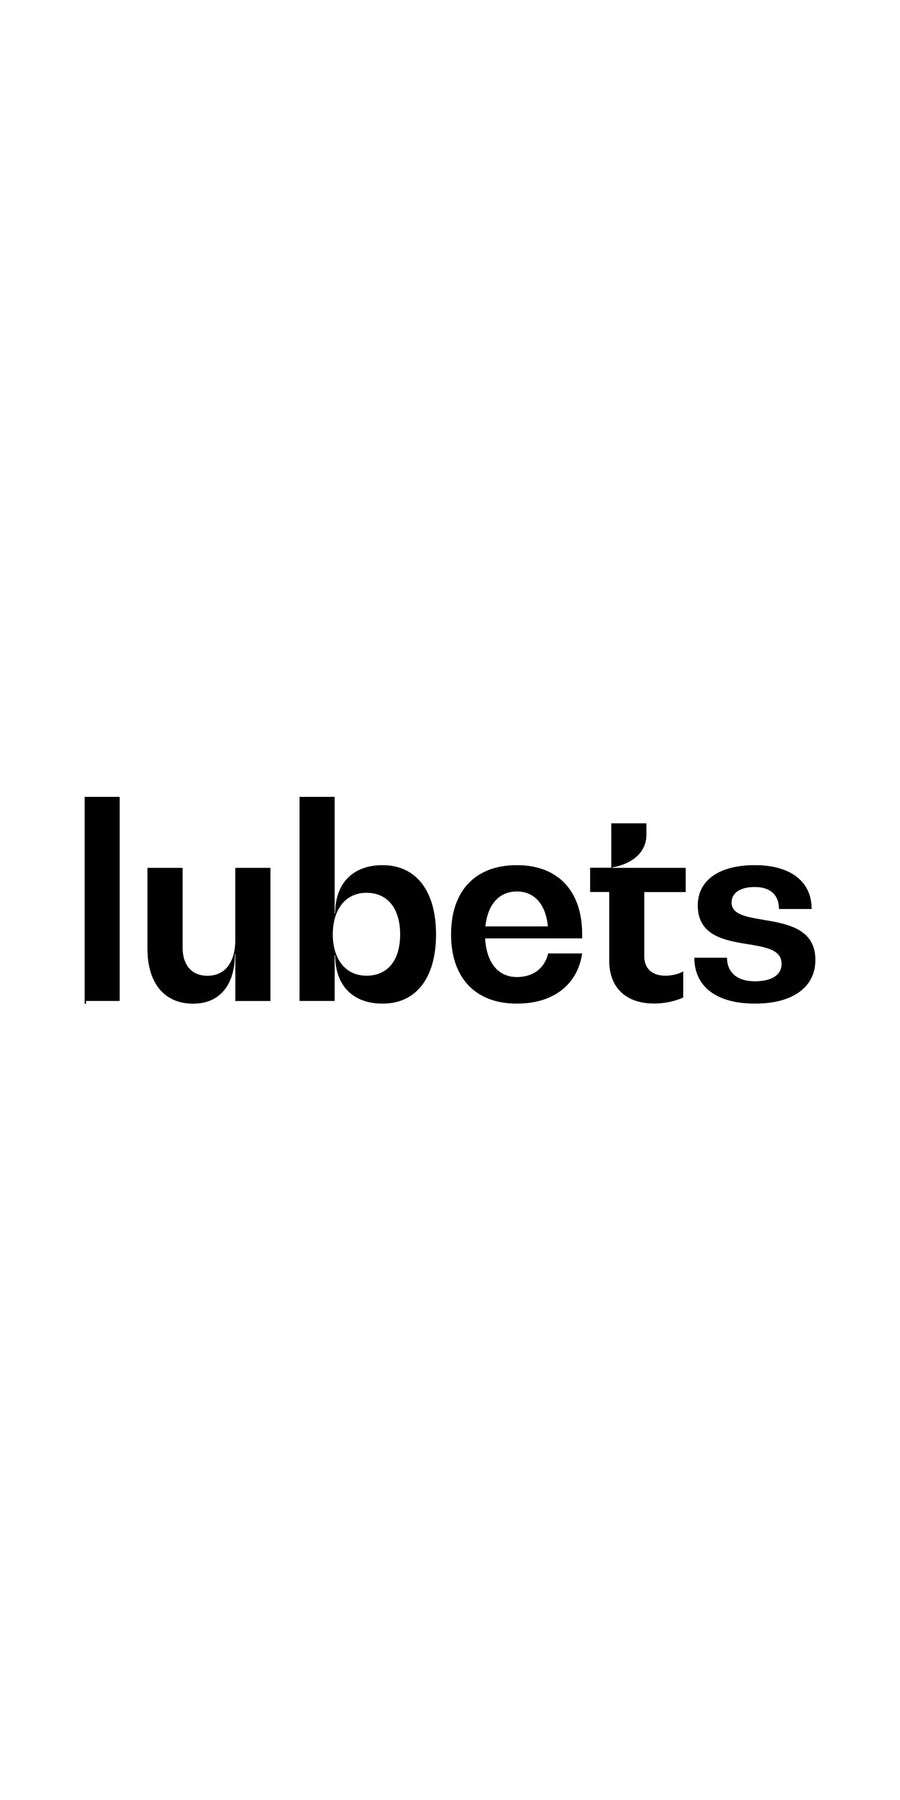 Lubets